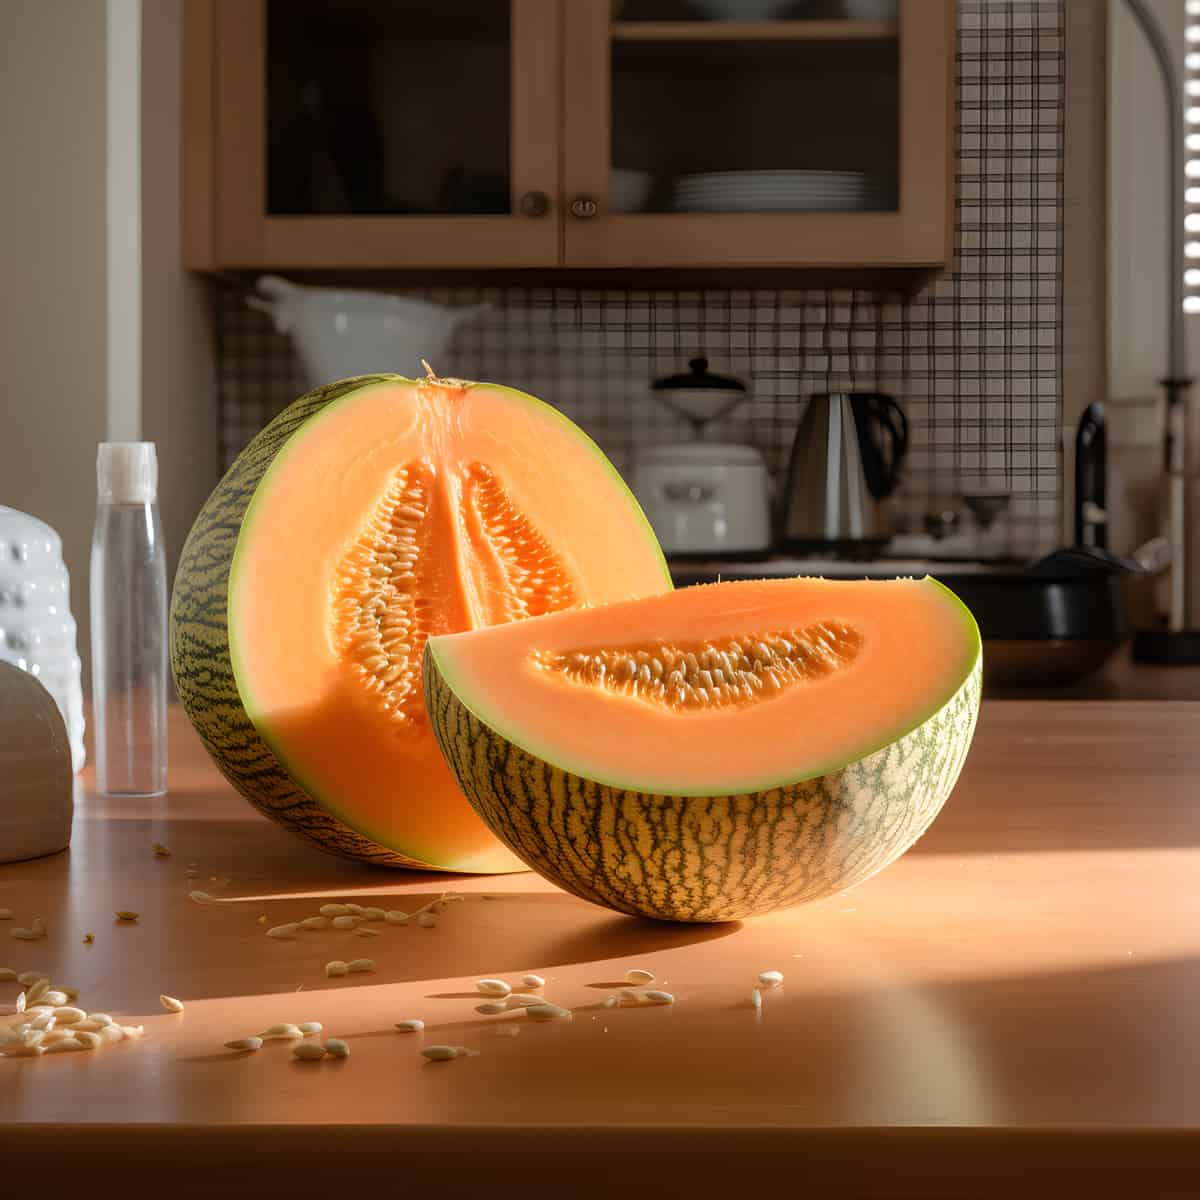 North American Cantaloupe on a kitchen counter